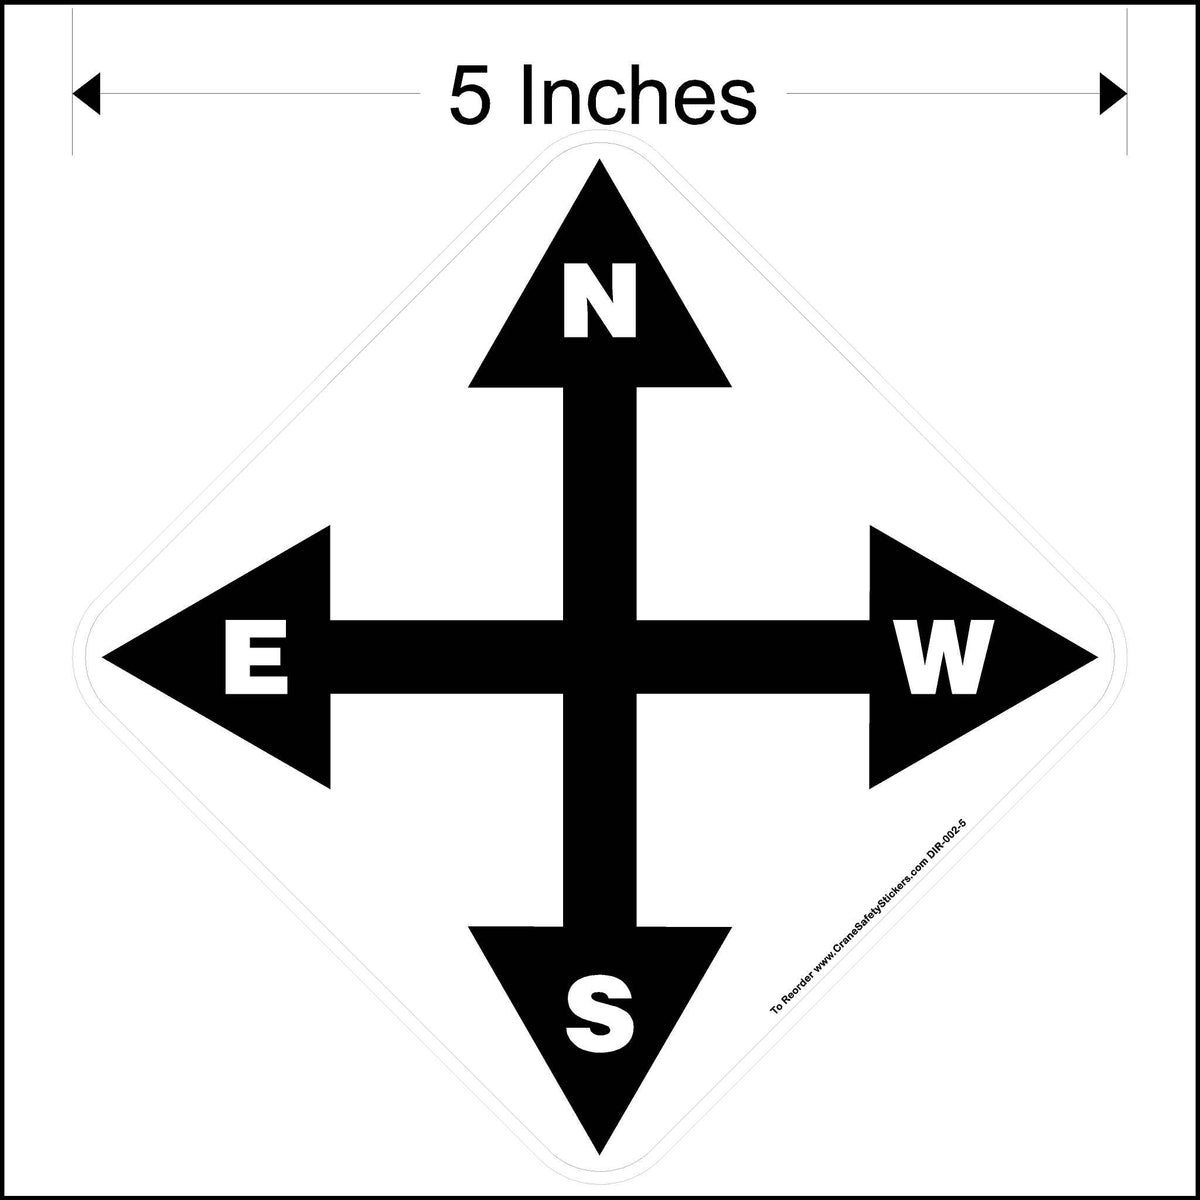 5 Inch North South West East Overhead Crane Directional Decal.